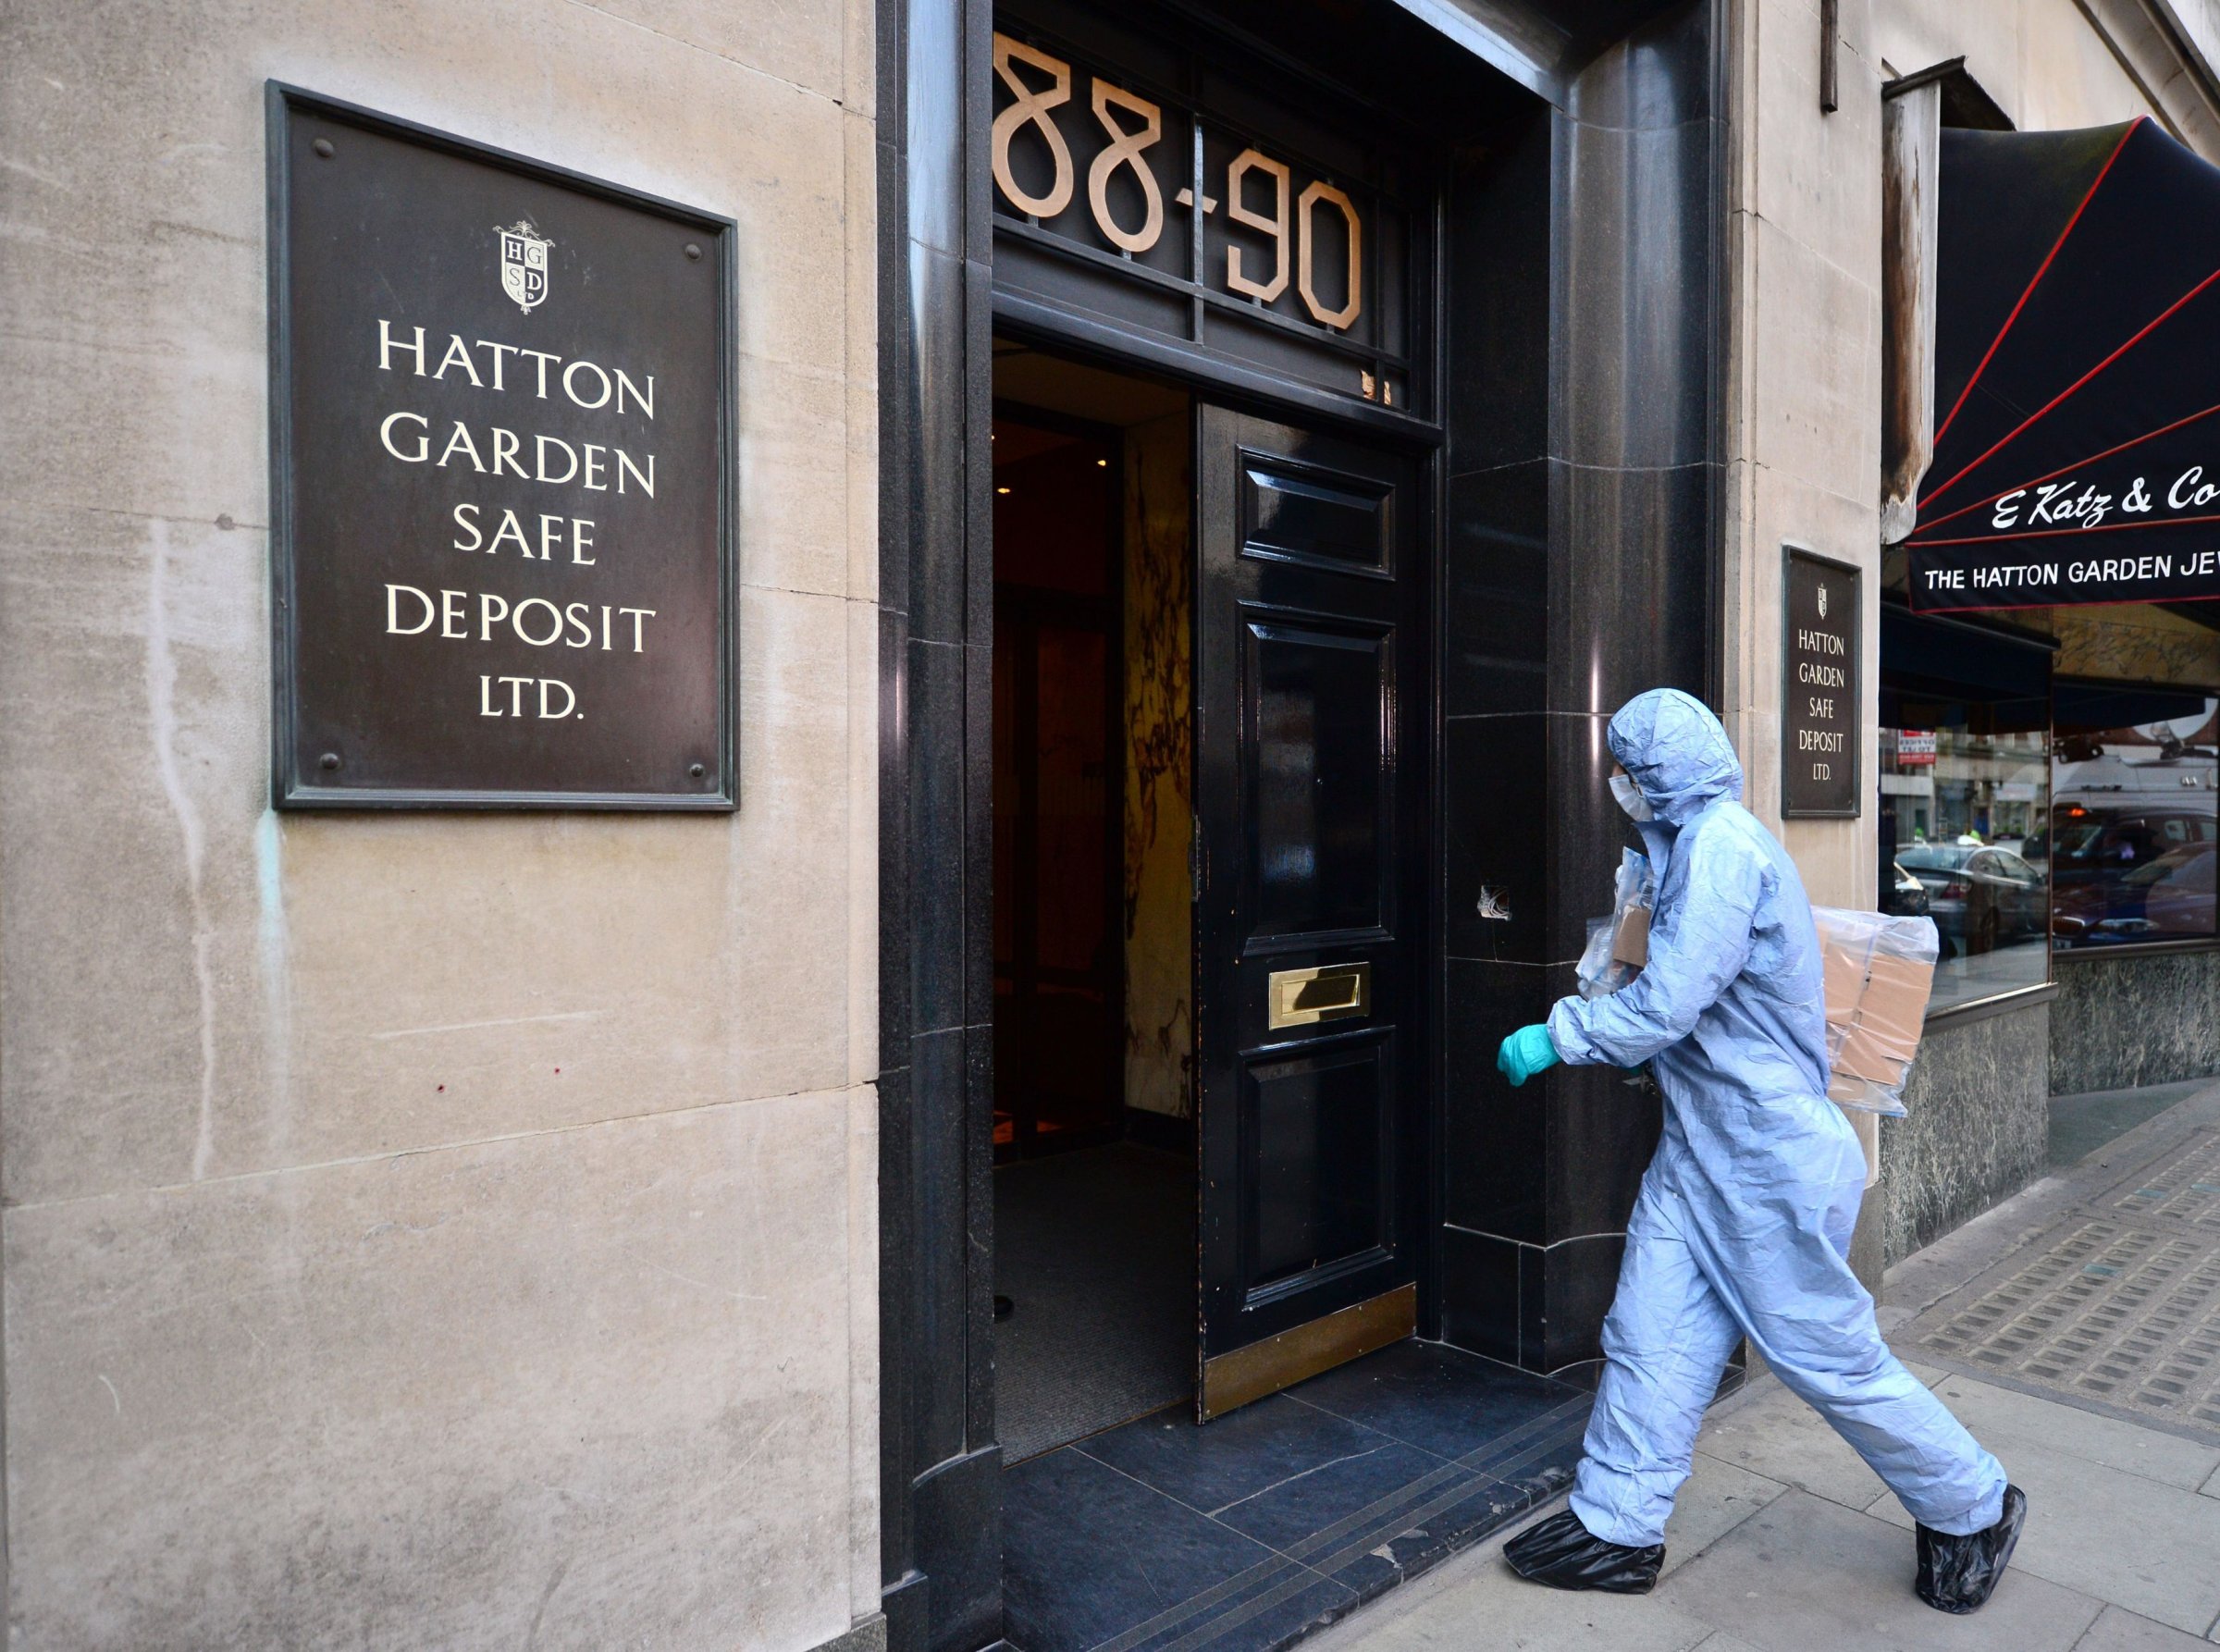 A police forensics officer enters the Hatton Garden Safe Deposit company in London Tuesday May 7, 2015 after it was burgled over the weekend.